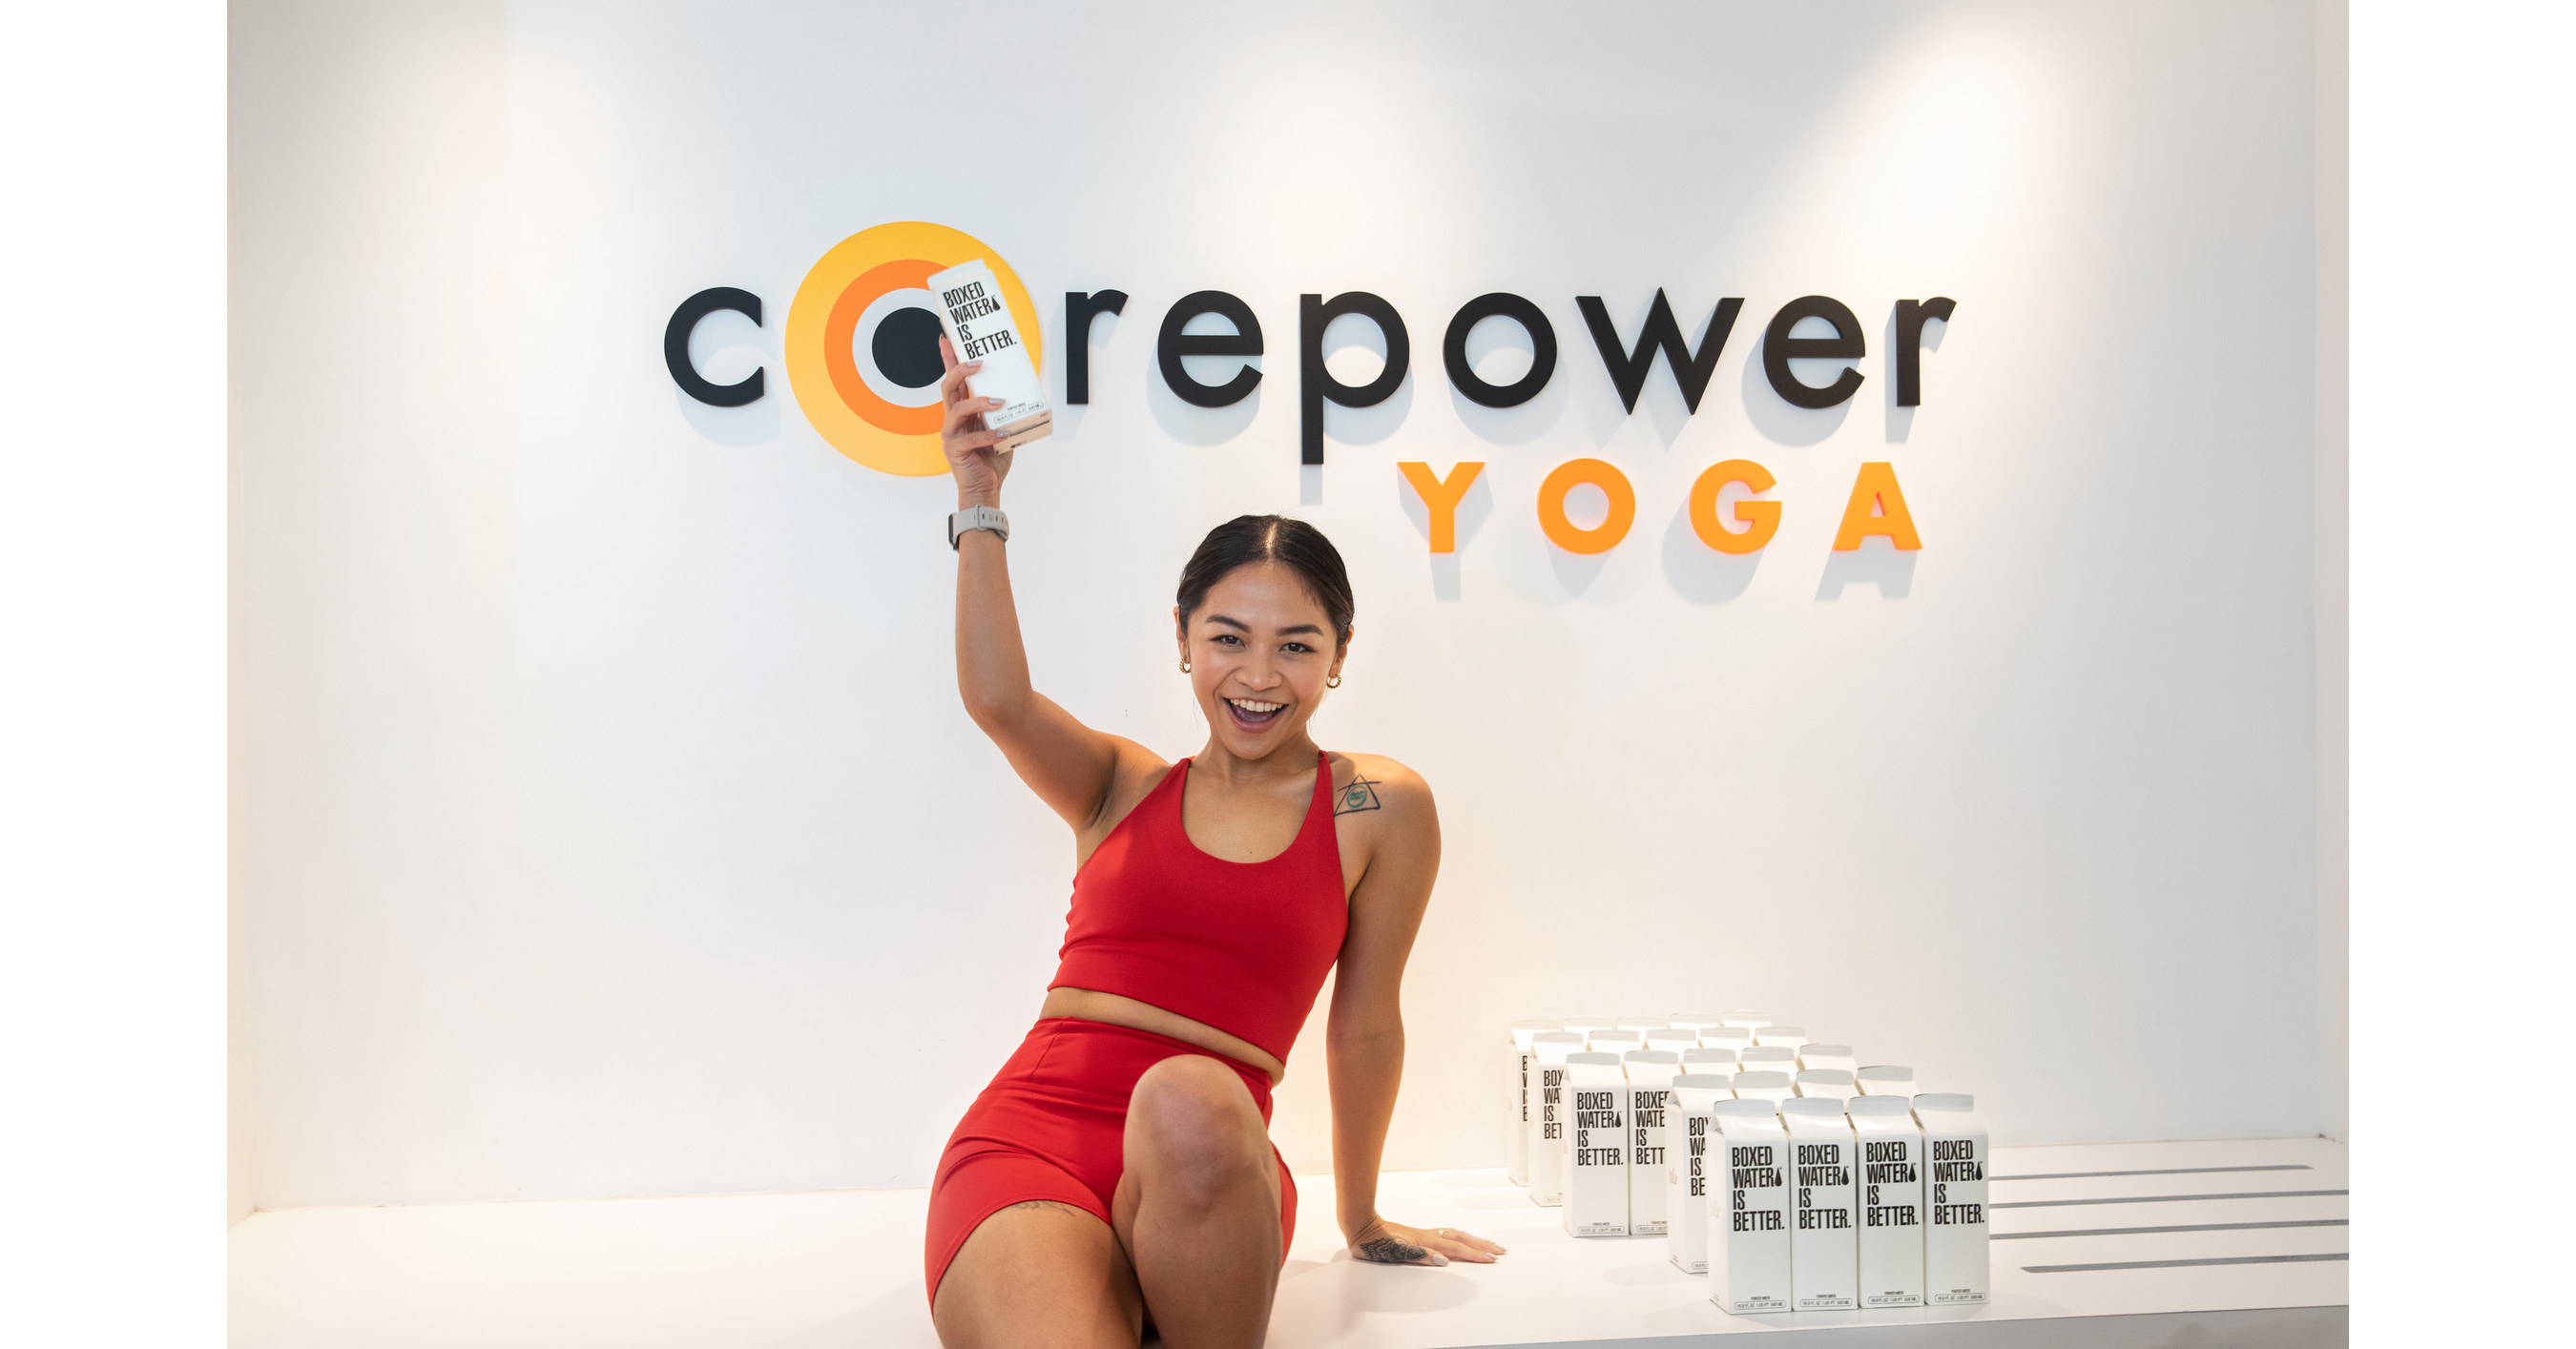 CorePower Yoga Lawsuit One to Watch for Failed M&A Deals During